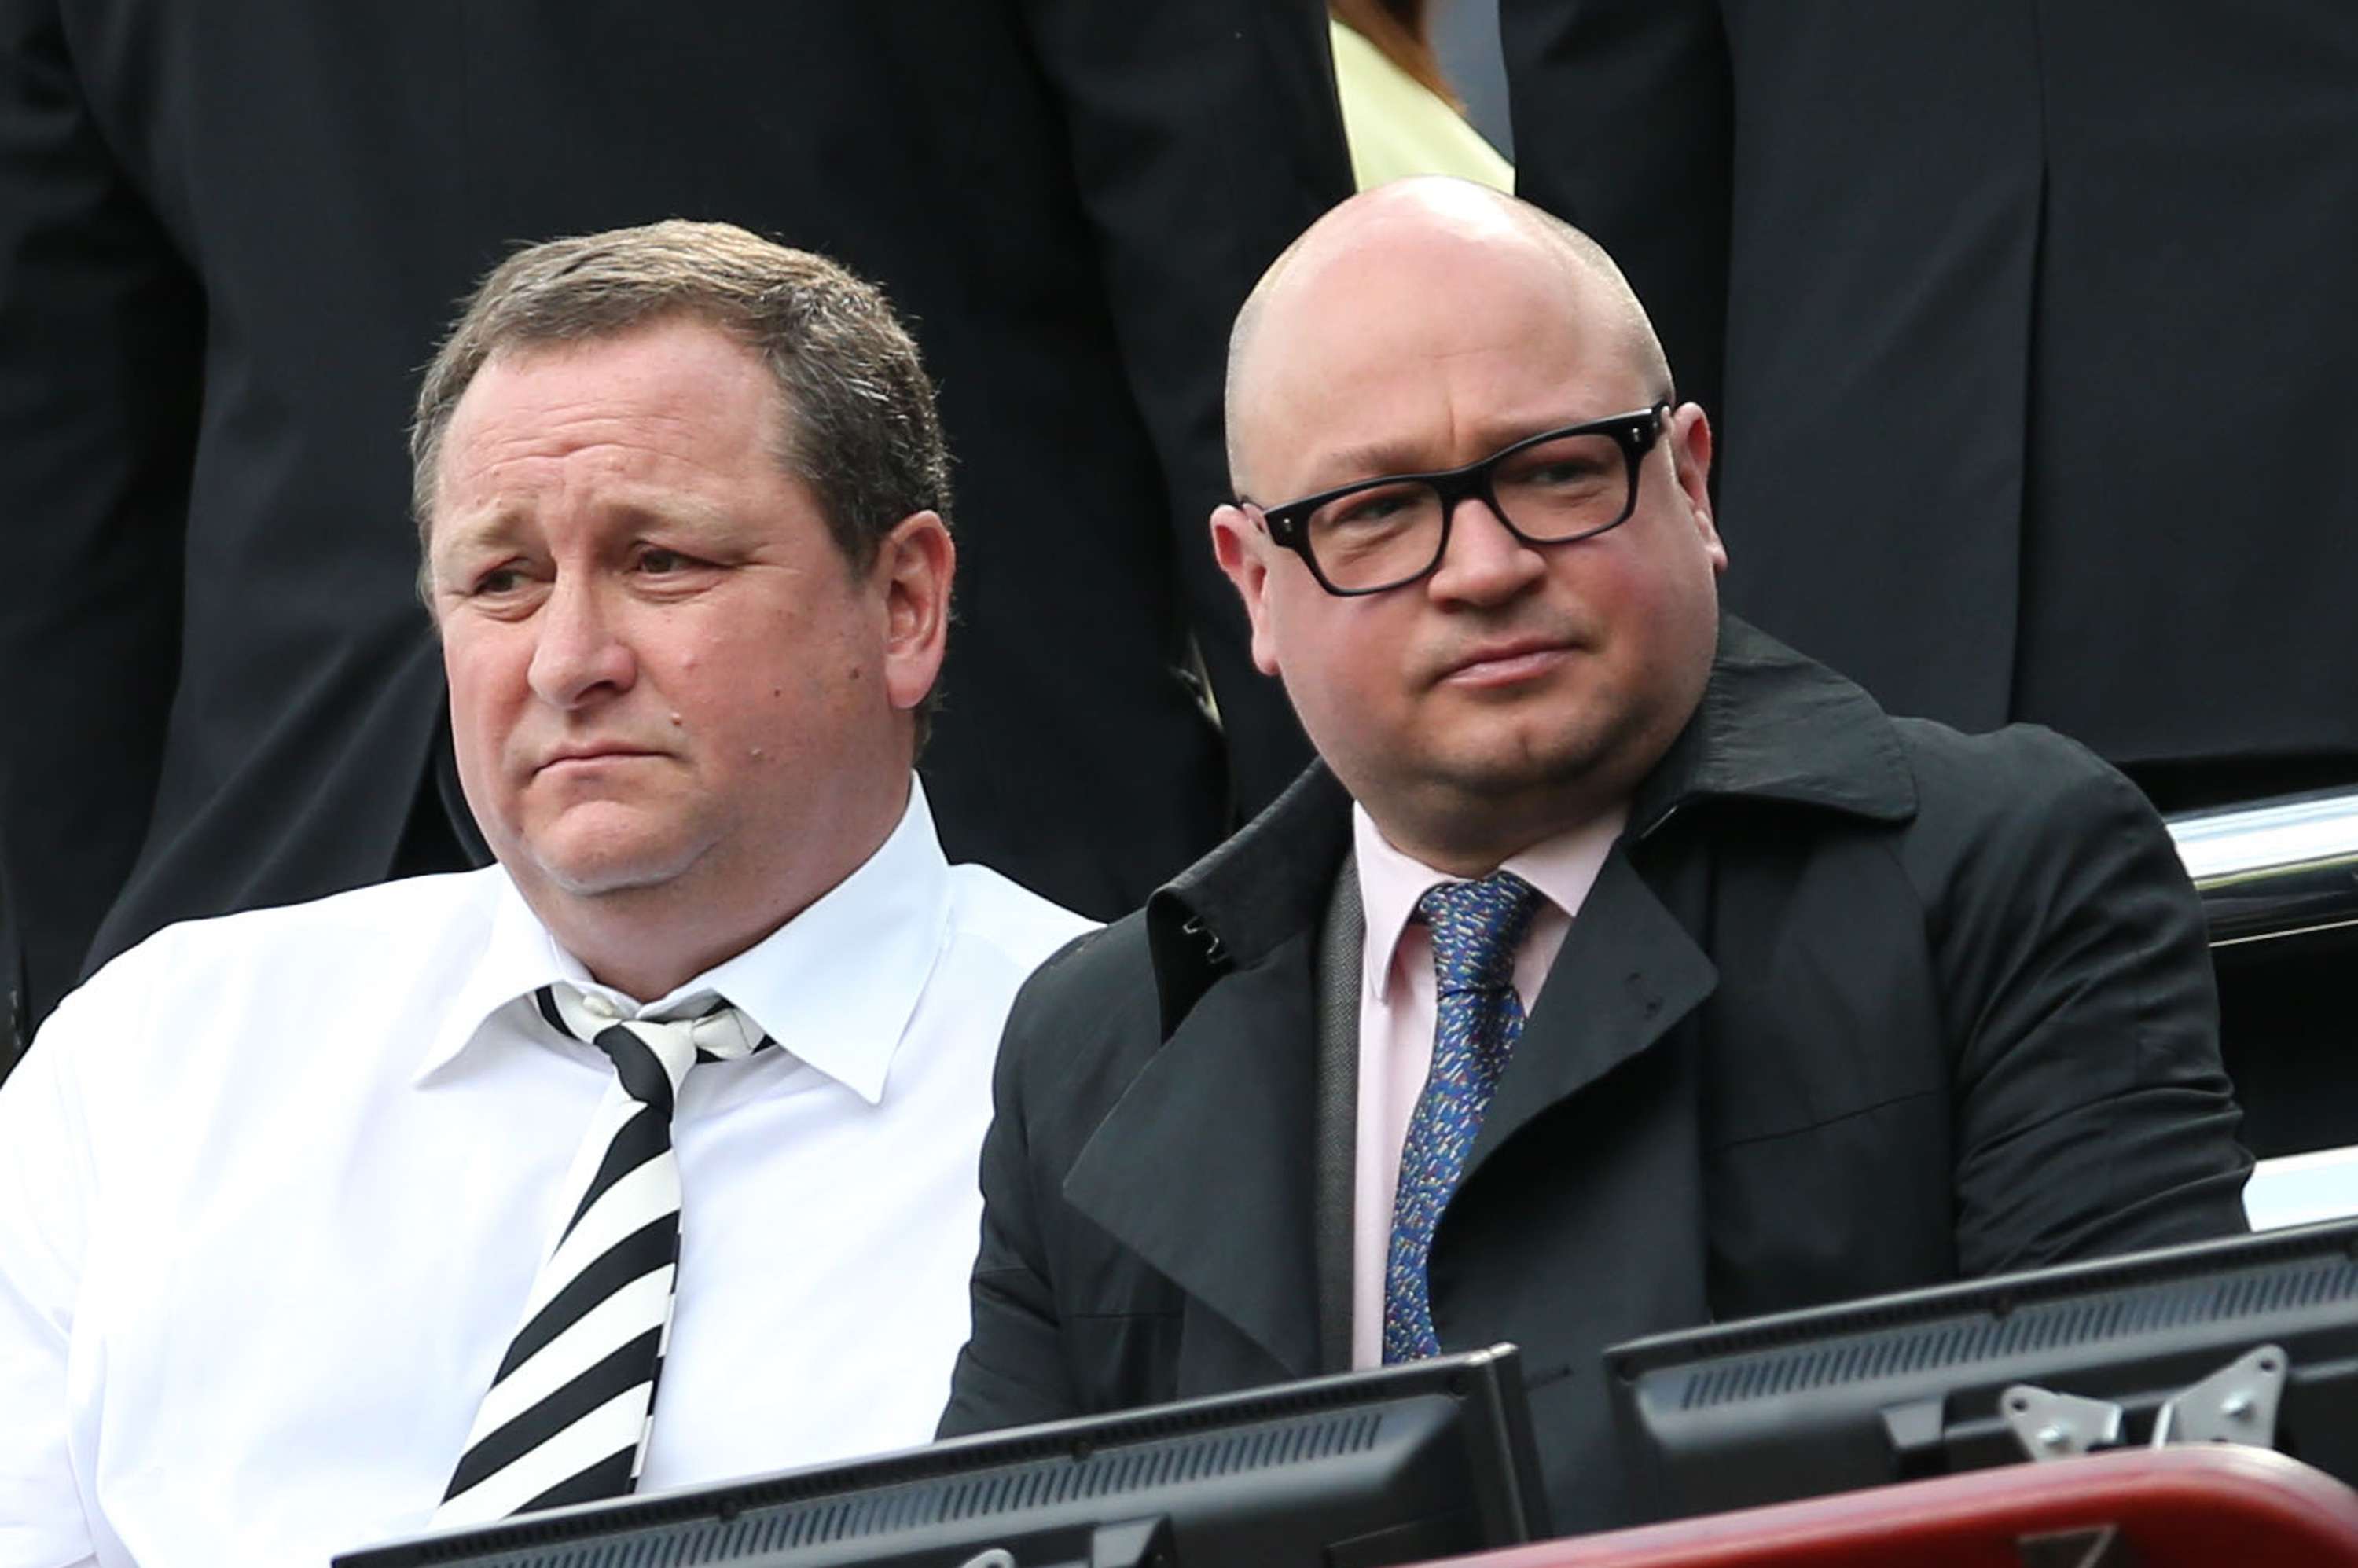 Newcastle United managing director Lee Charnley (right), pictured with owner Mike Ashley, is under investigation. Photo: AFP